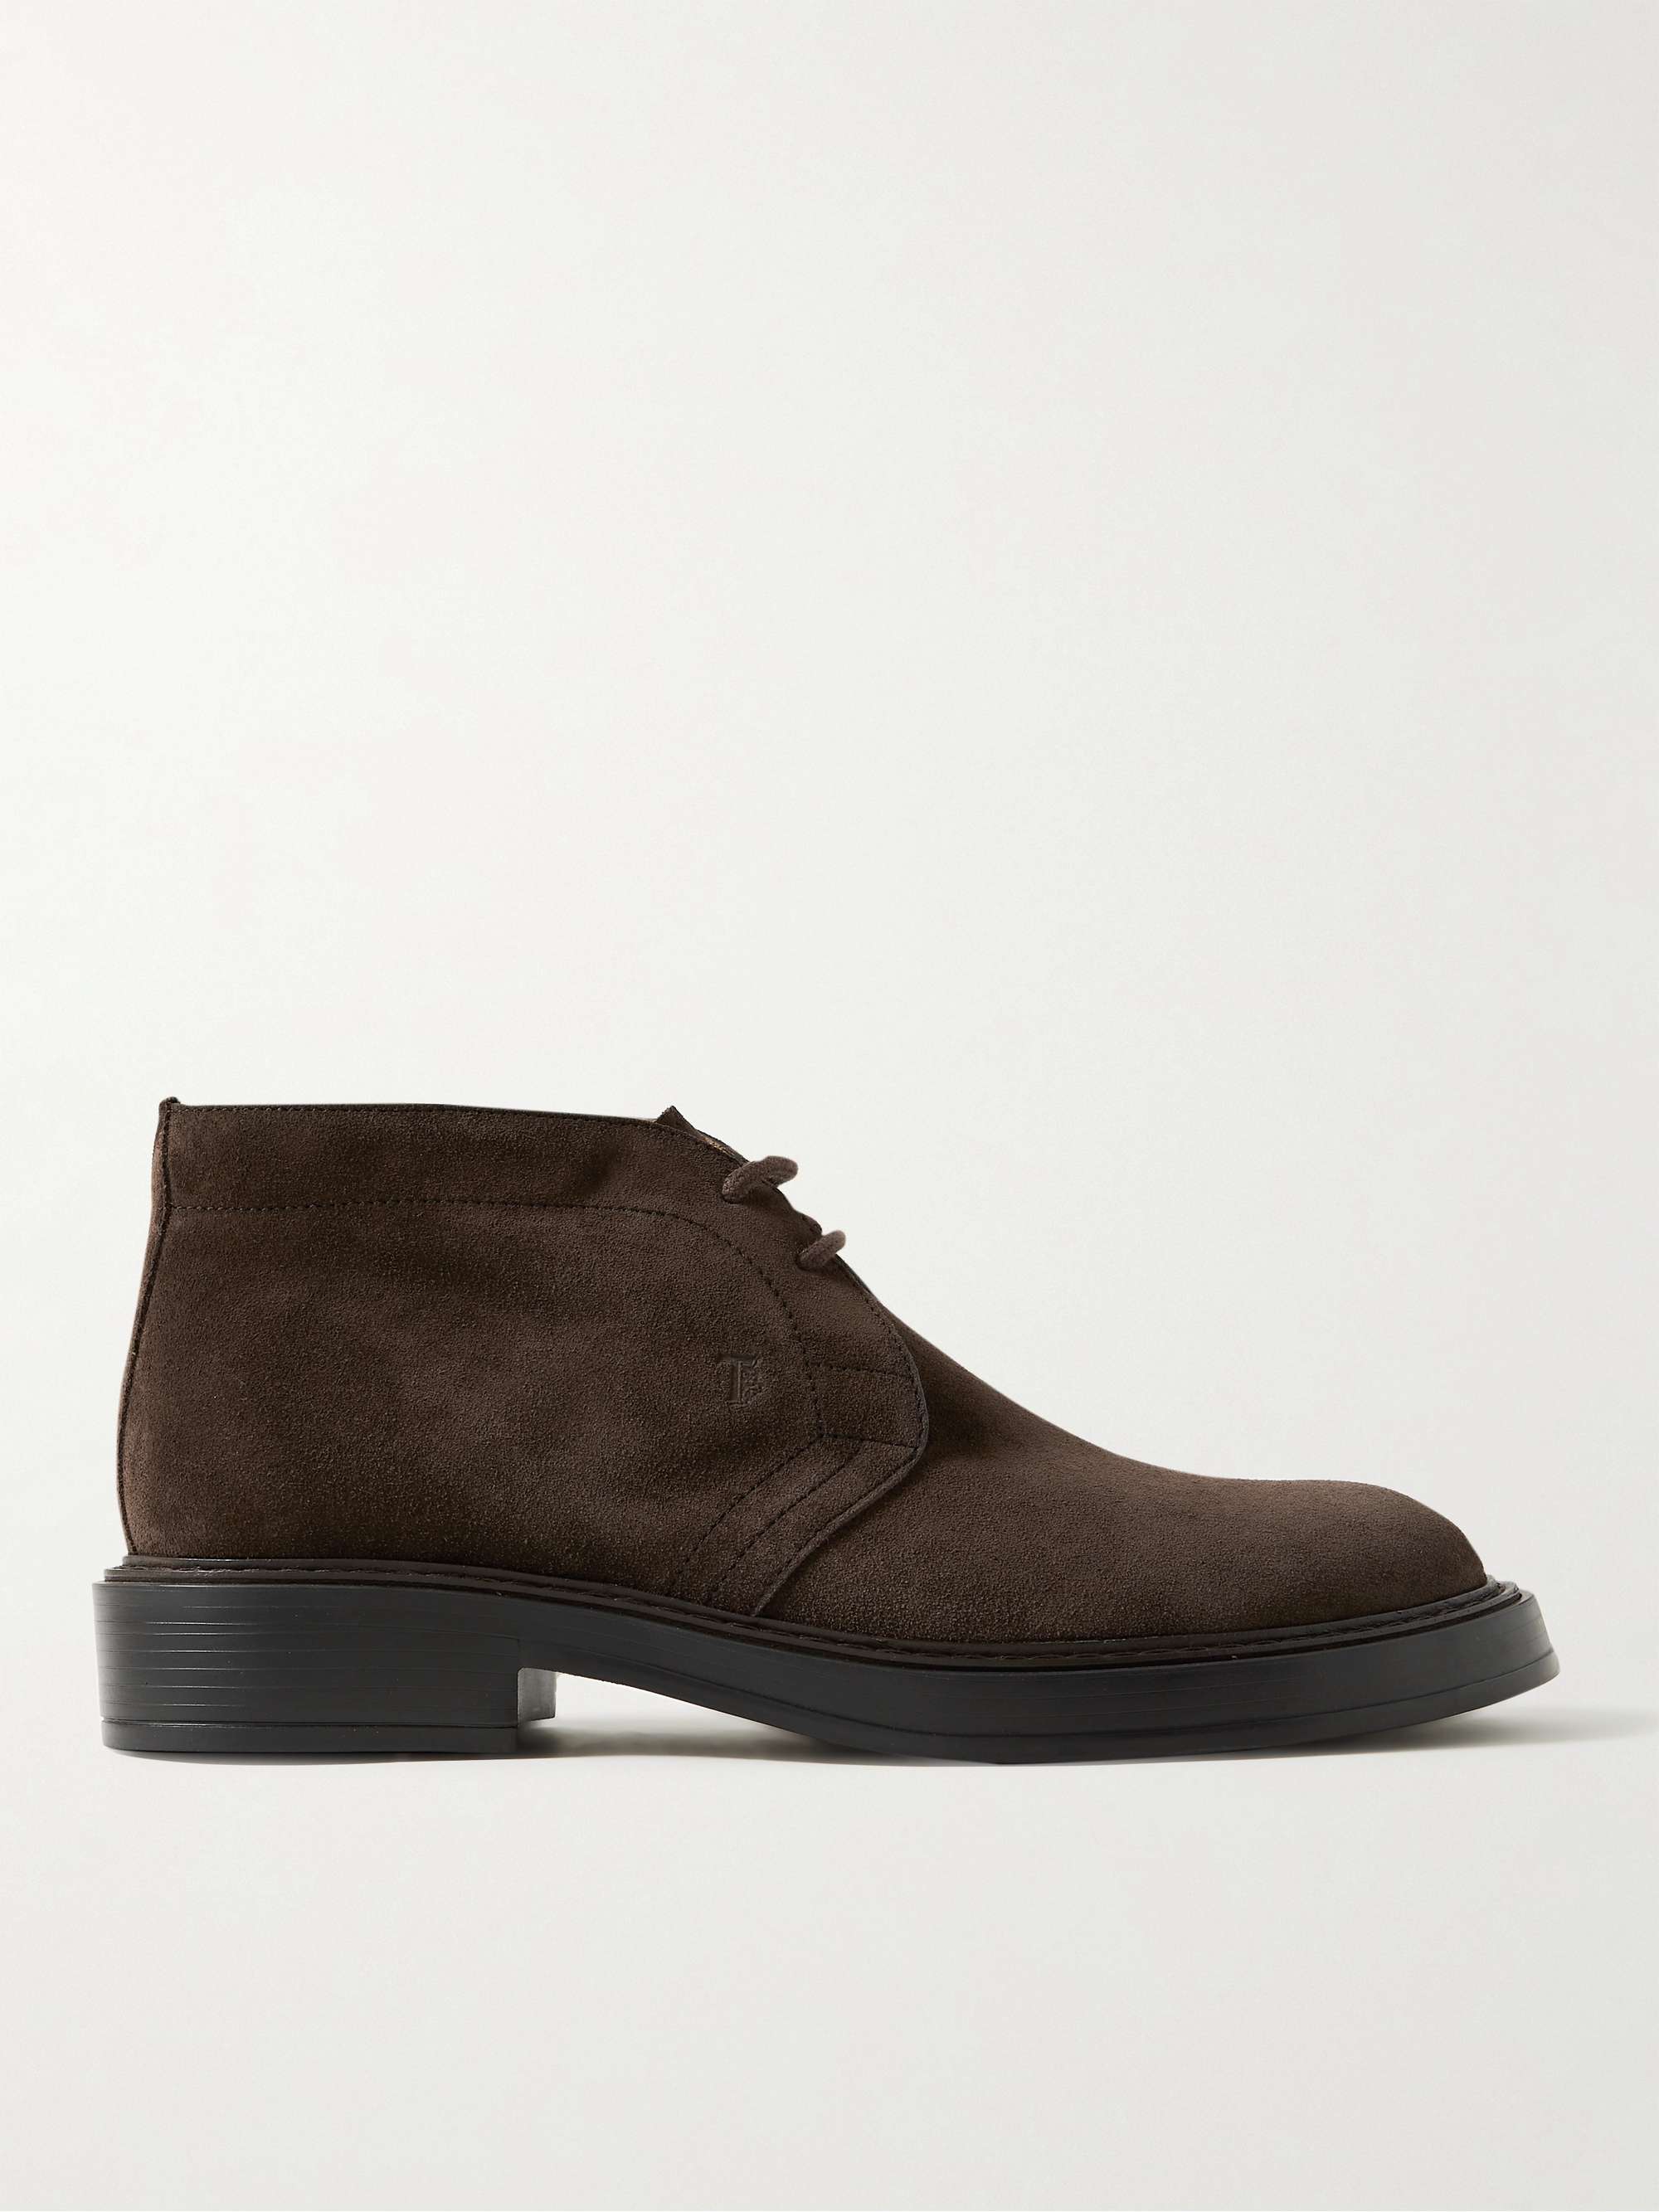 TOD'S Suede Chukka Boots for Men | MR PORTER